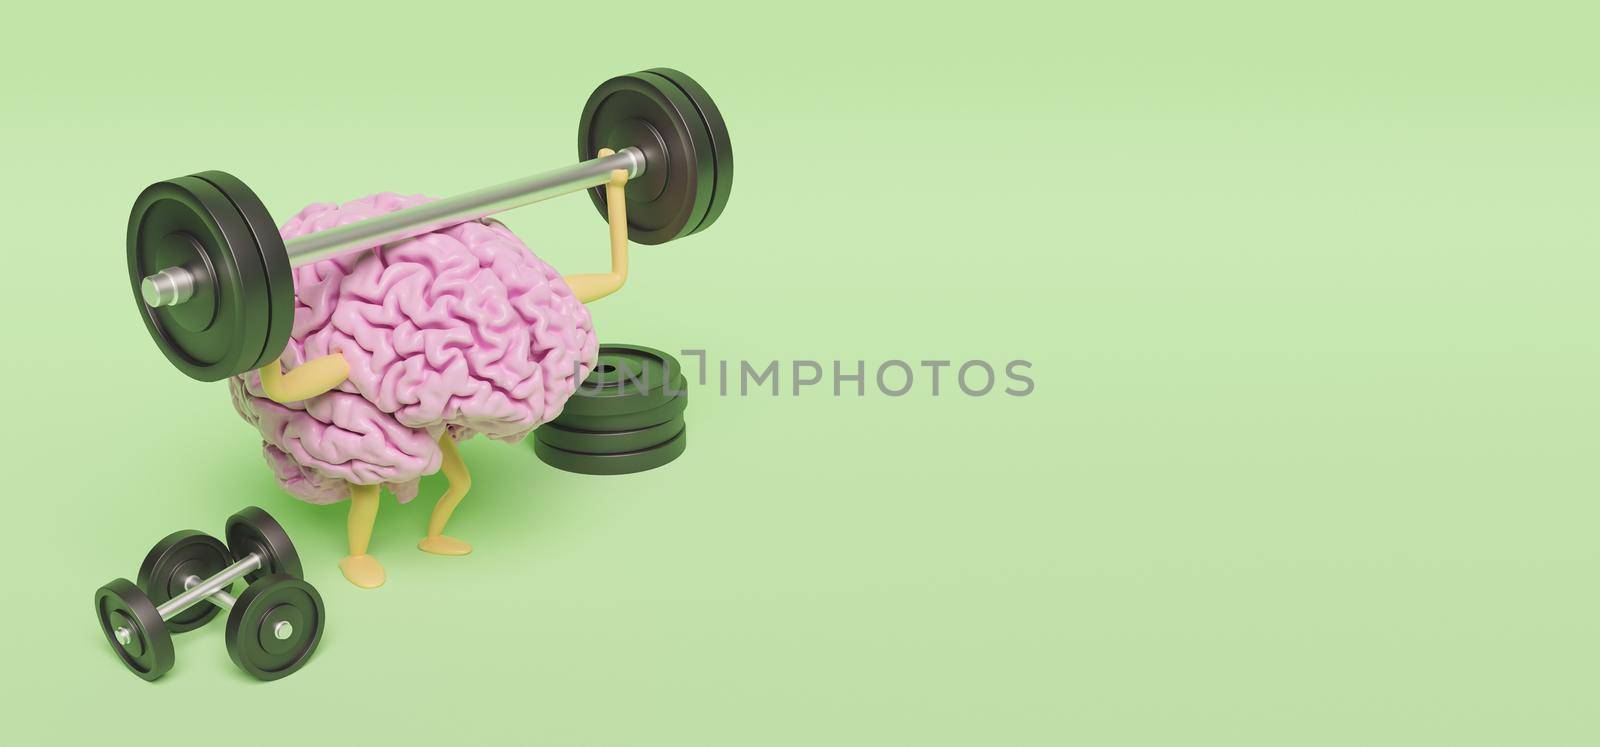 3d illustration of pink brain with legs and arms exercising with dumbbells on green background